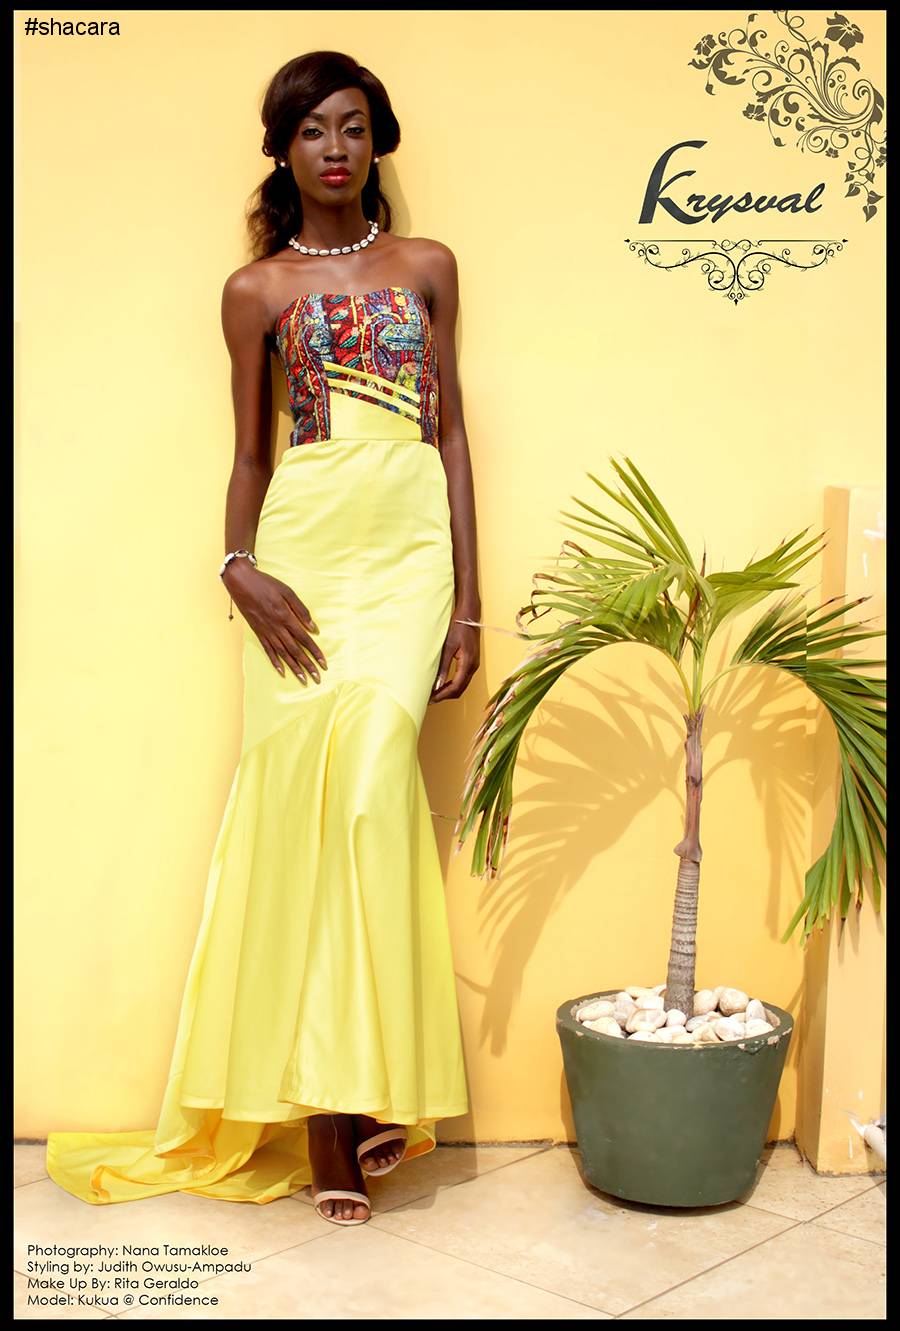 New Ghanaian Fashion Brand Krysval Debuts Its First Look Book, The ‘Harmattan 2016’ Collection